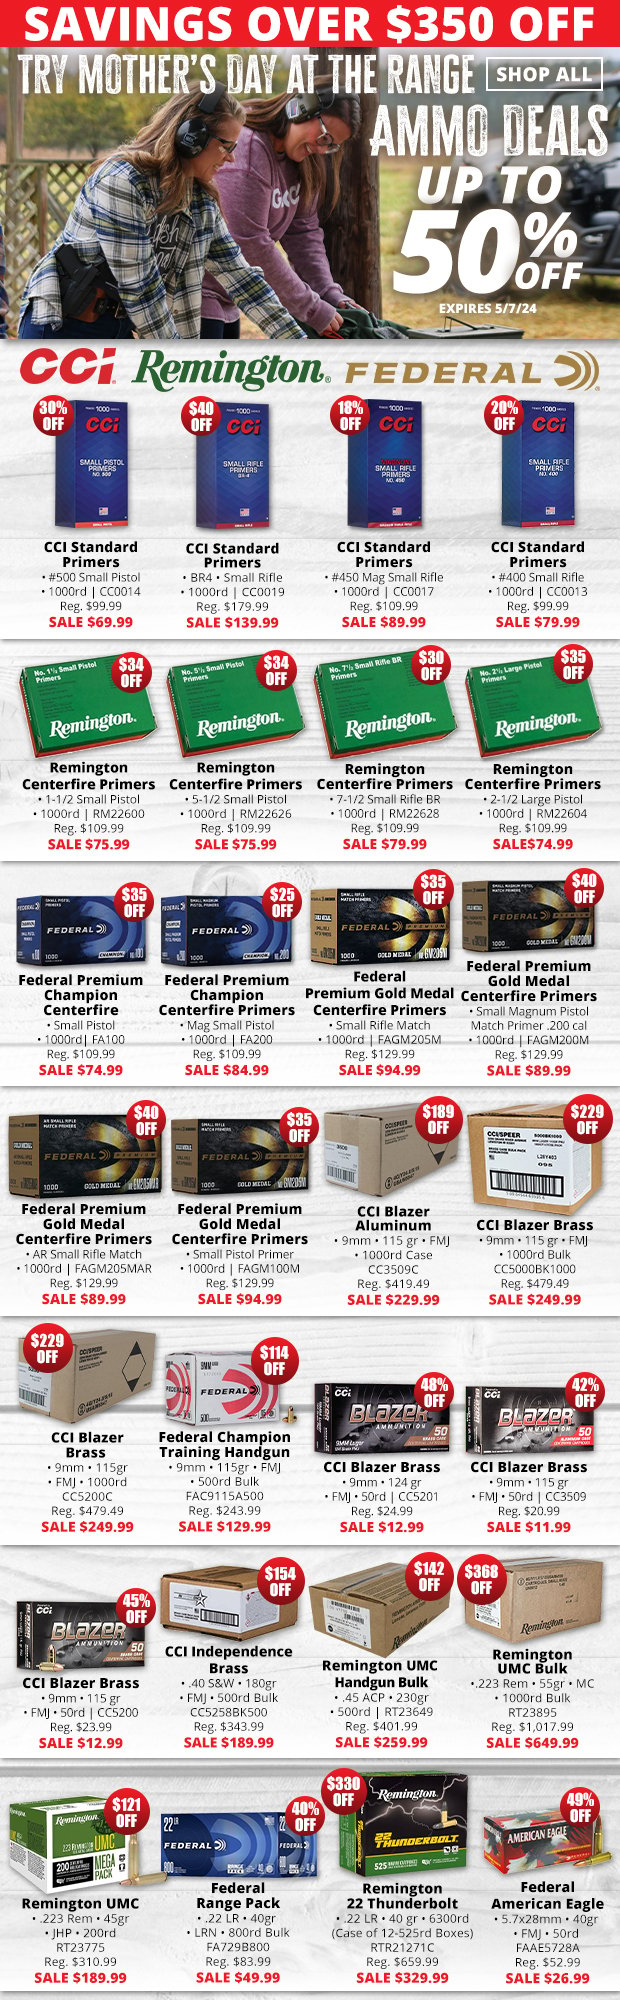 Over $350 Off in Ammo Deals!